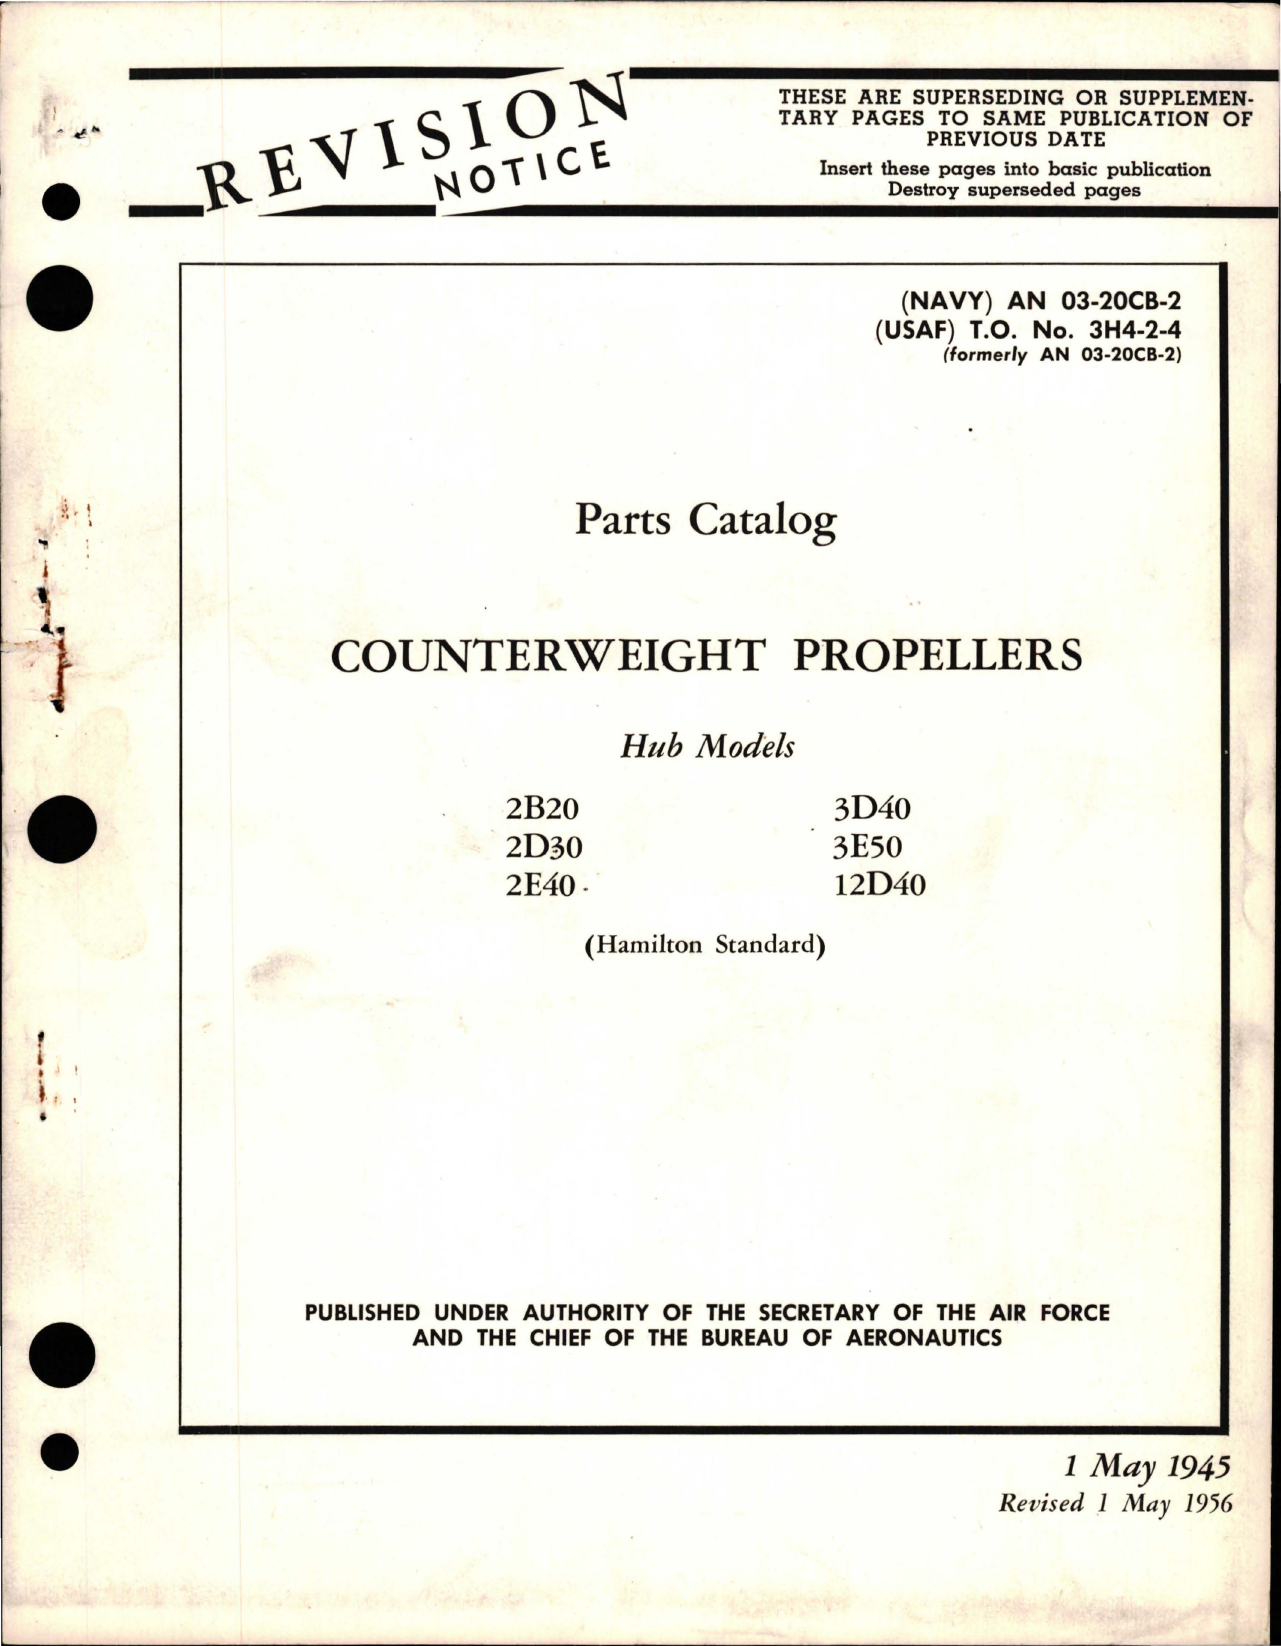 Sample page 1 from AirCorps Library document: Parts Catalog for Counterweight Propellers - Models 2B20, 2D30, 2E40, 3D40, 3E50, and 12D40